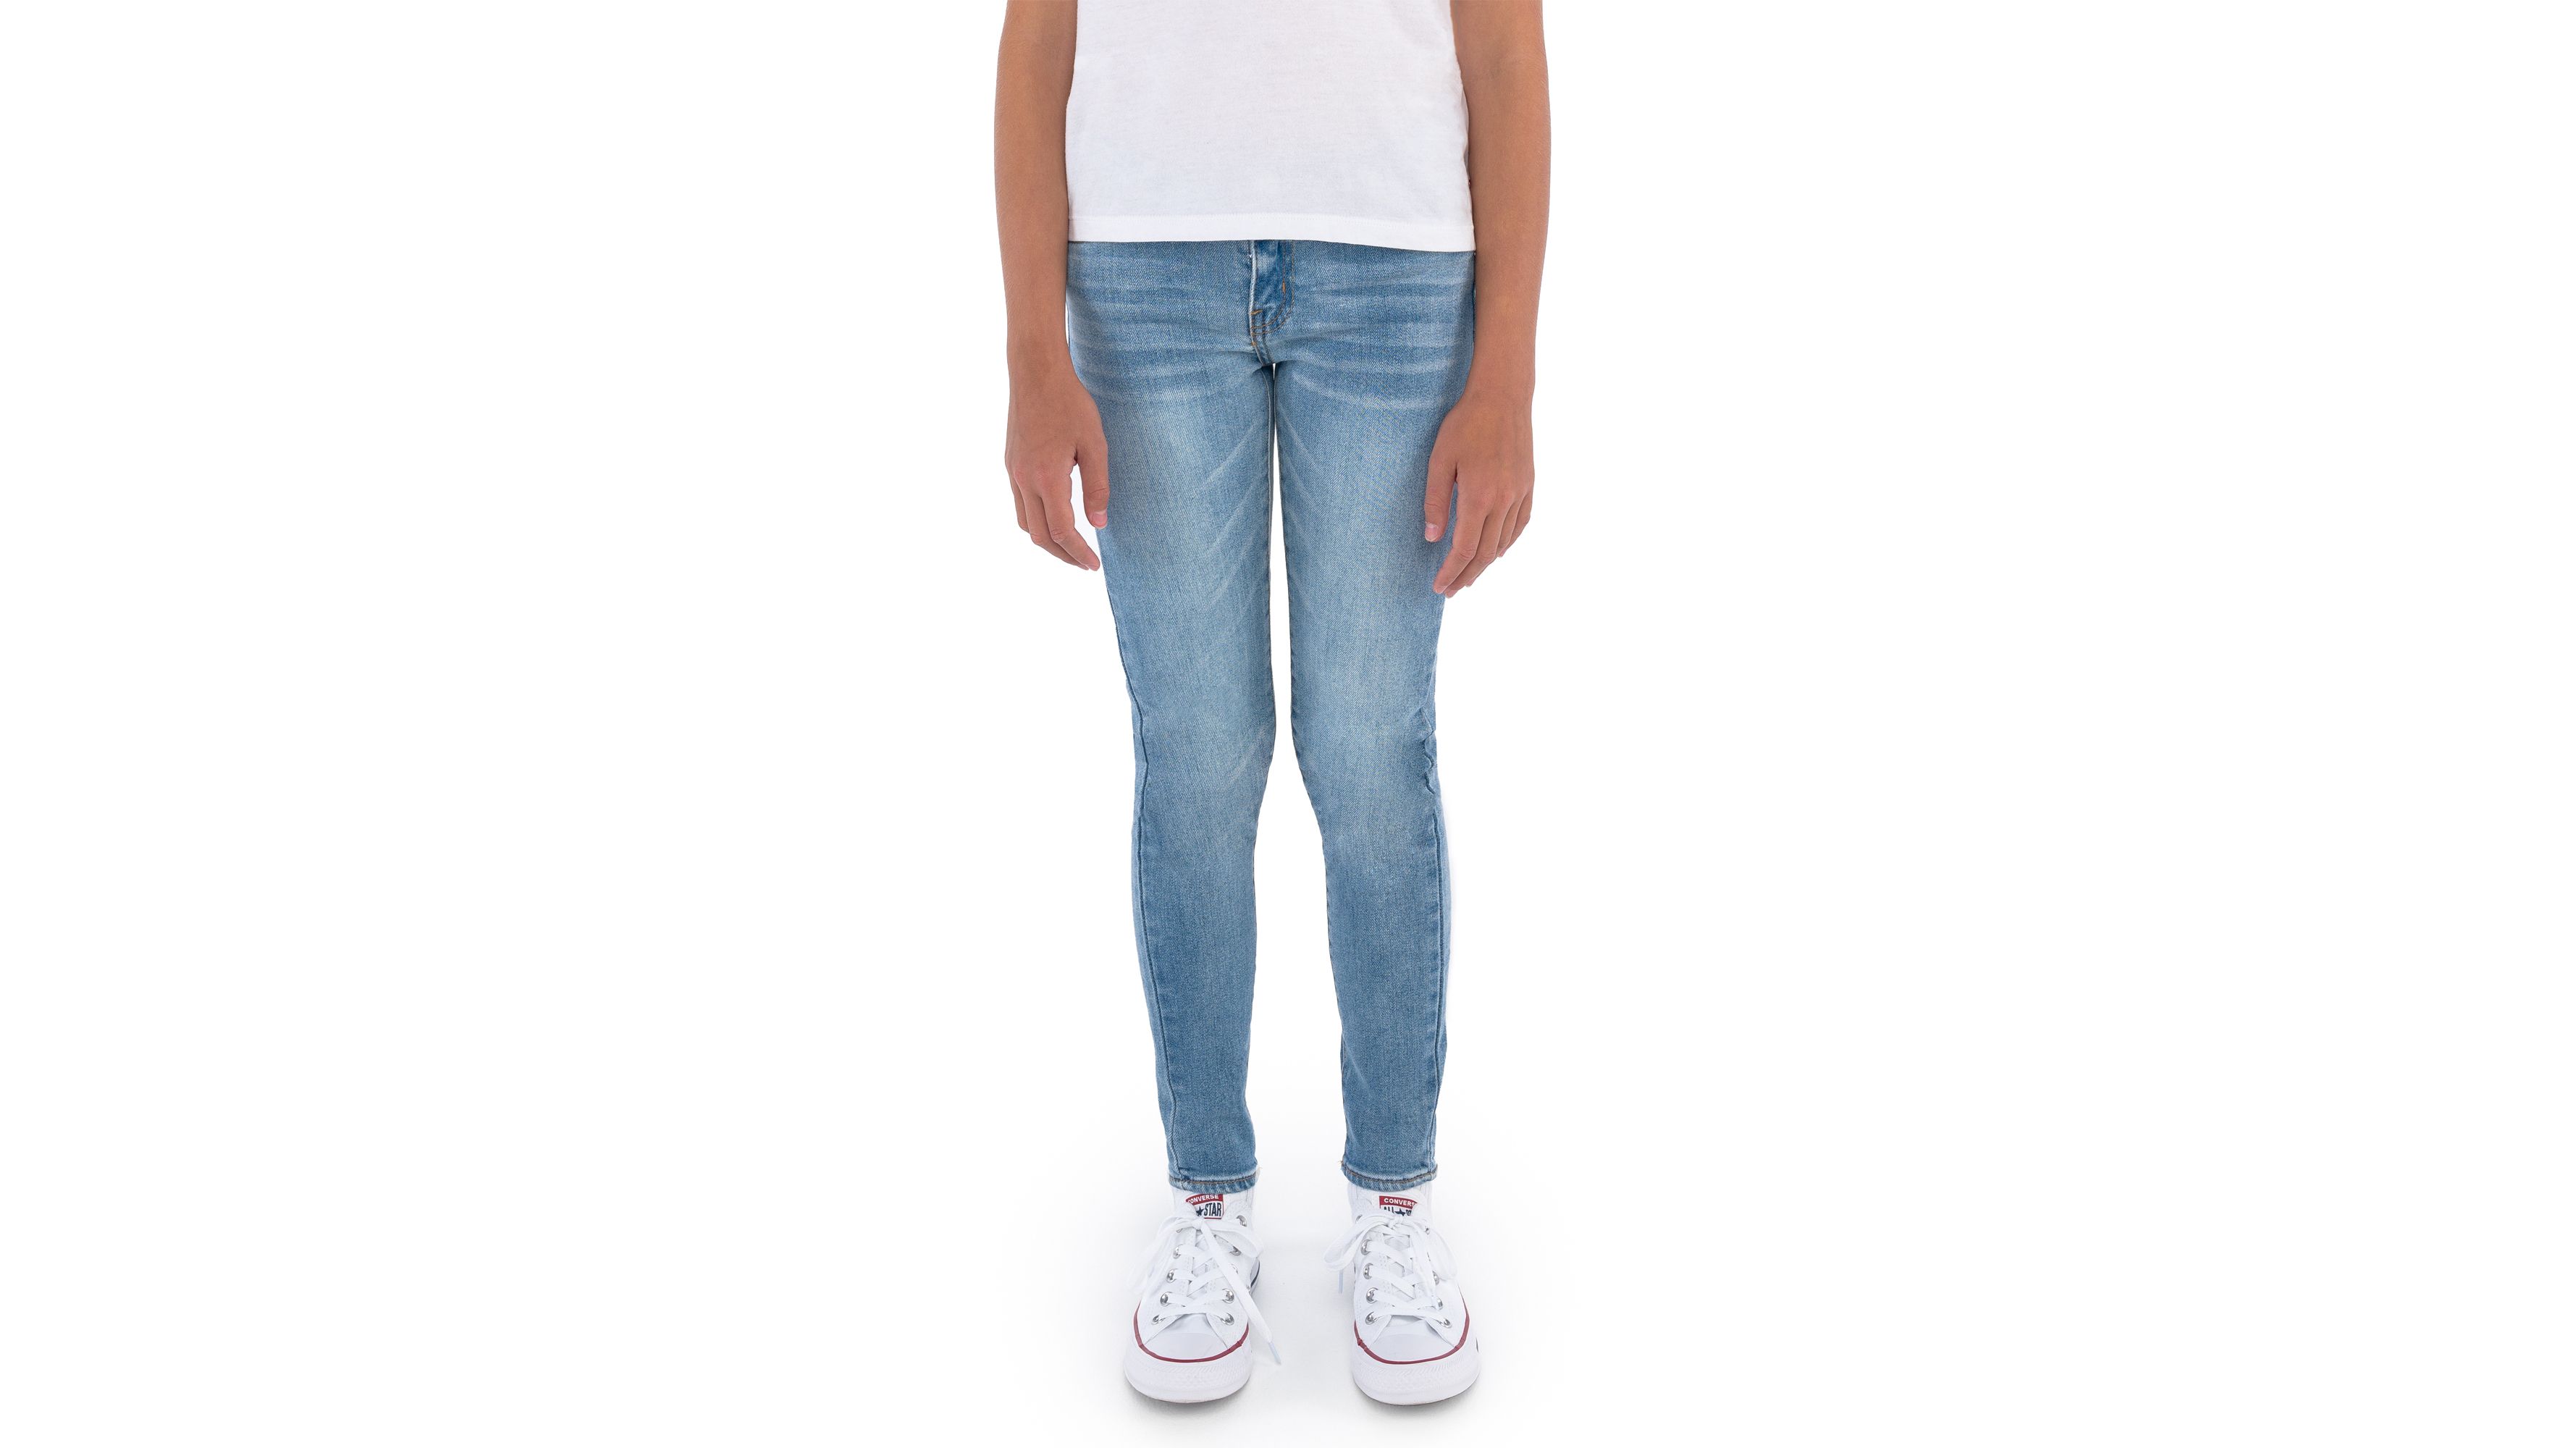 Levi's Baby Girls Super Skinny Fit Jeans 